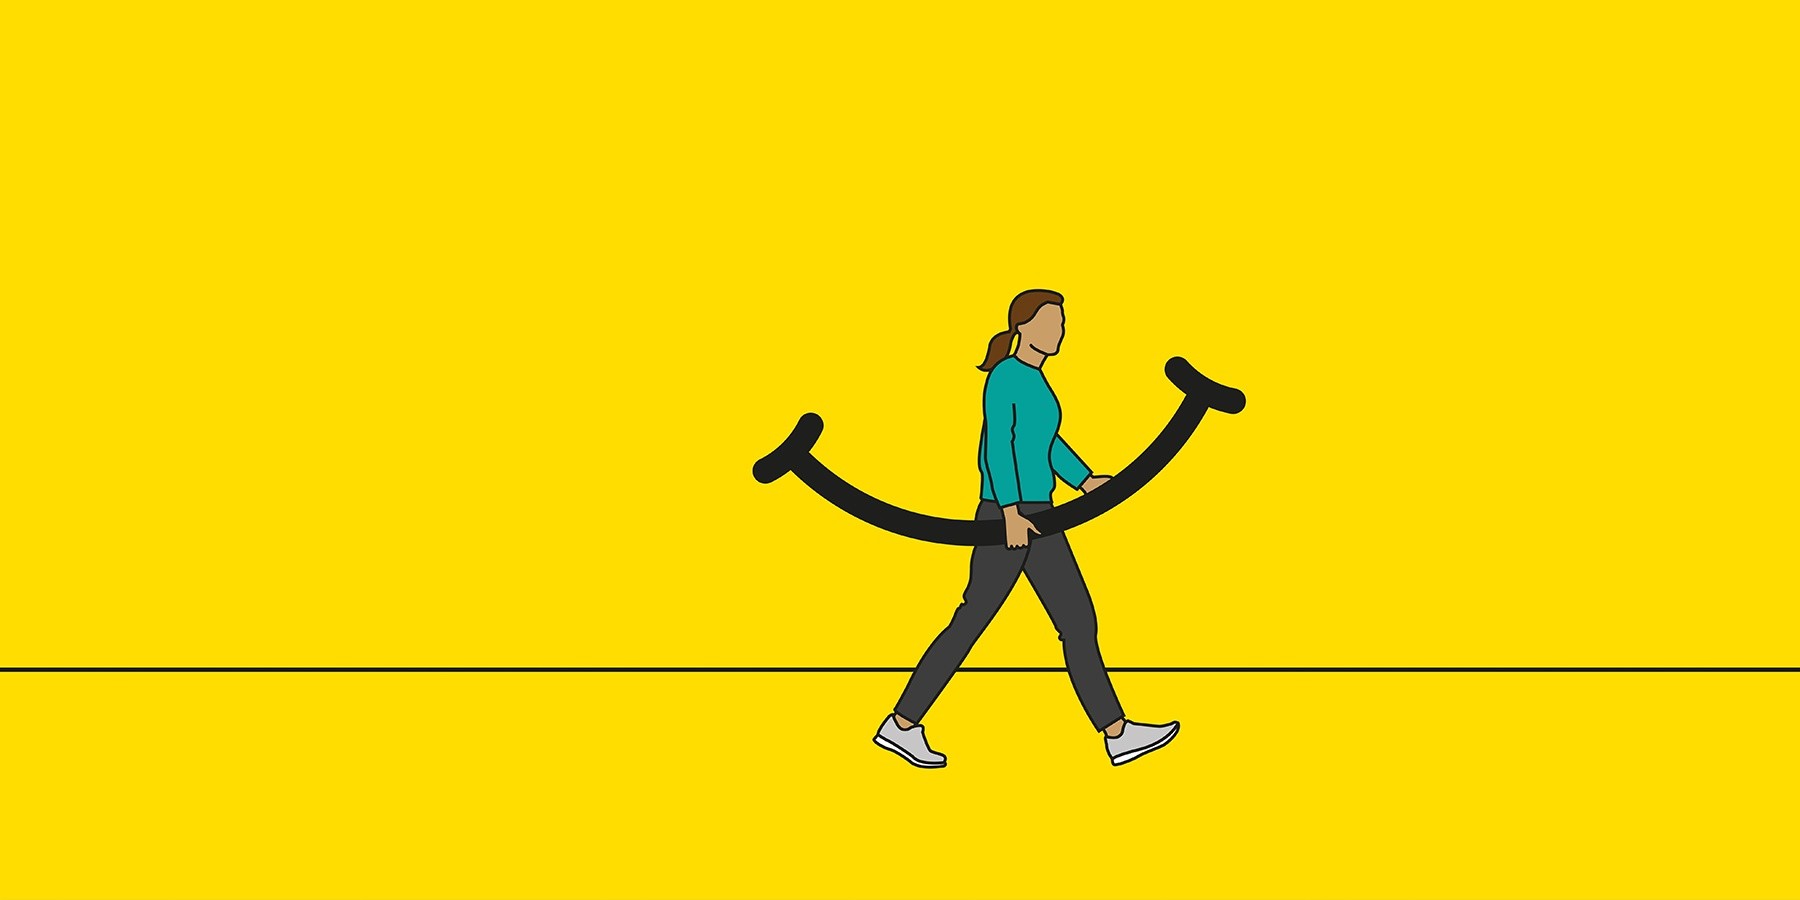 Illustration of a person carrying a smile